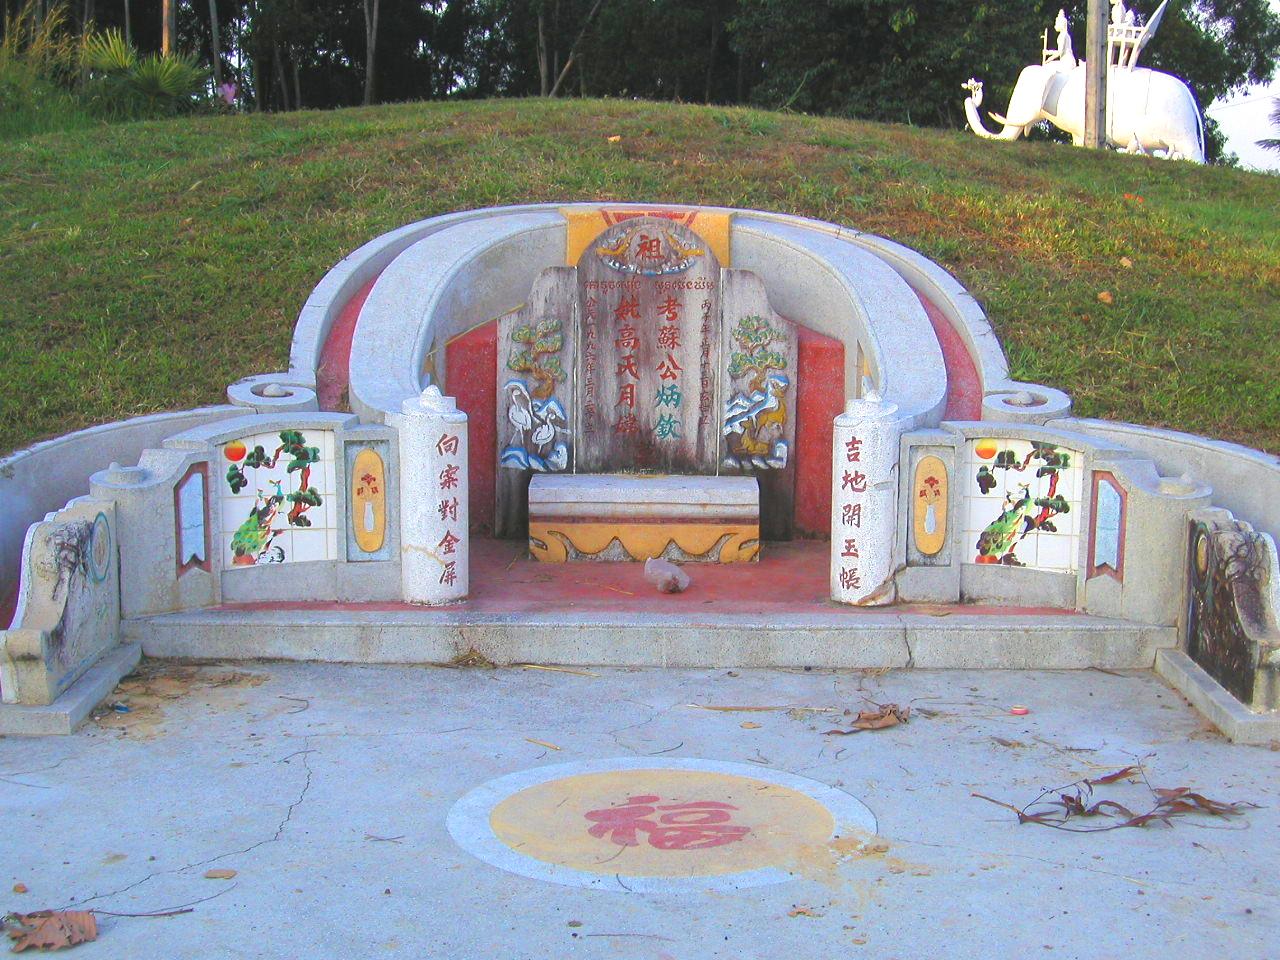 A typical Chinese grave